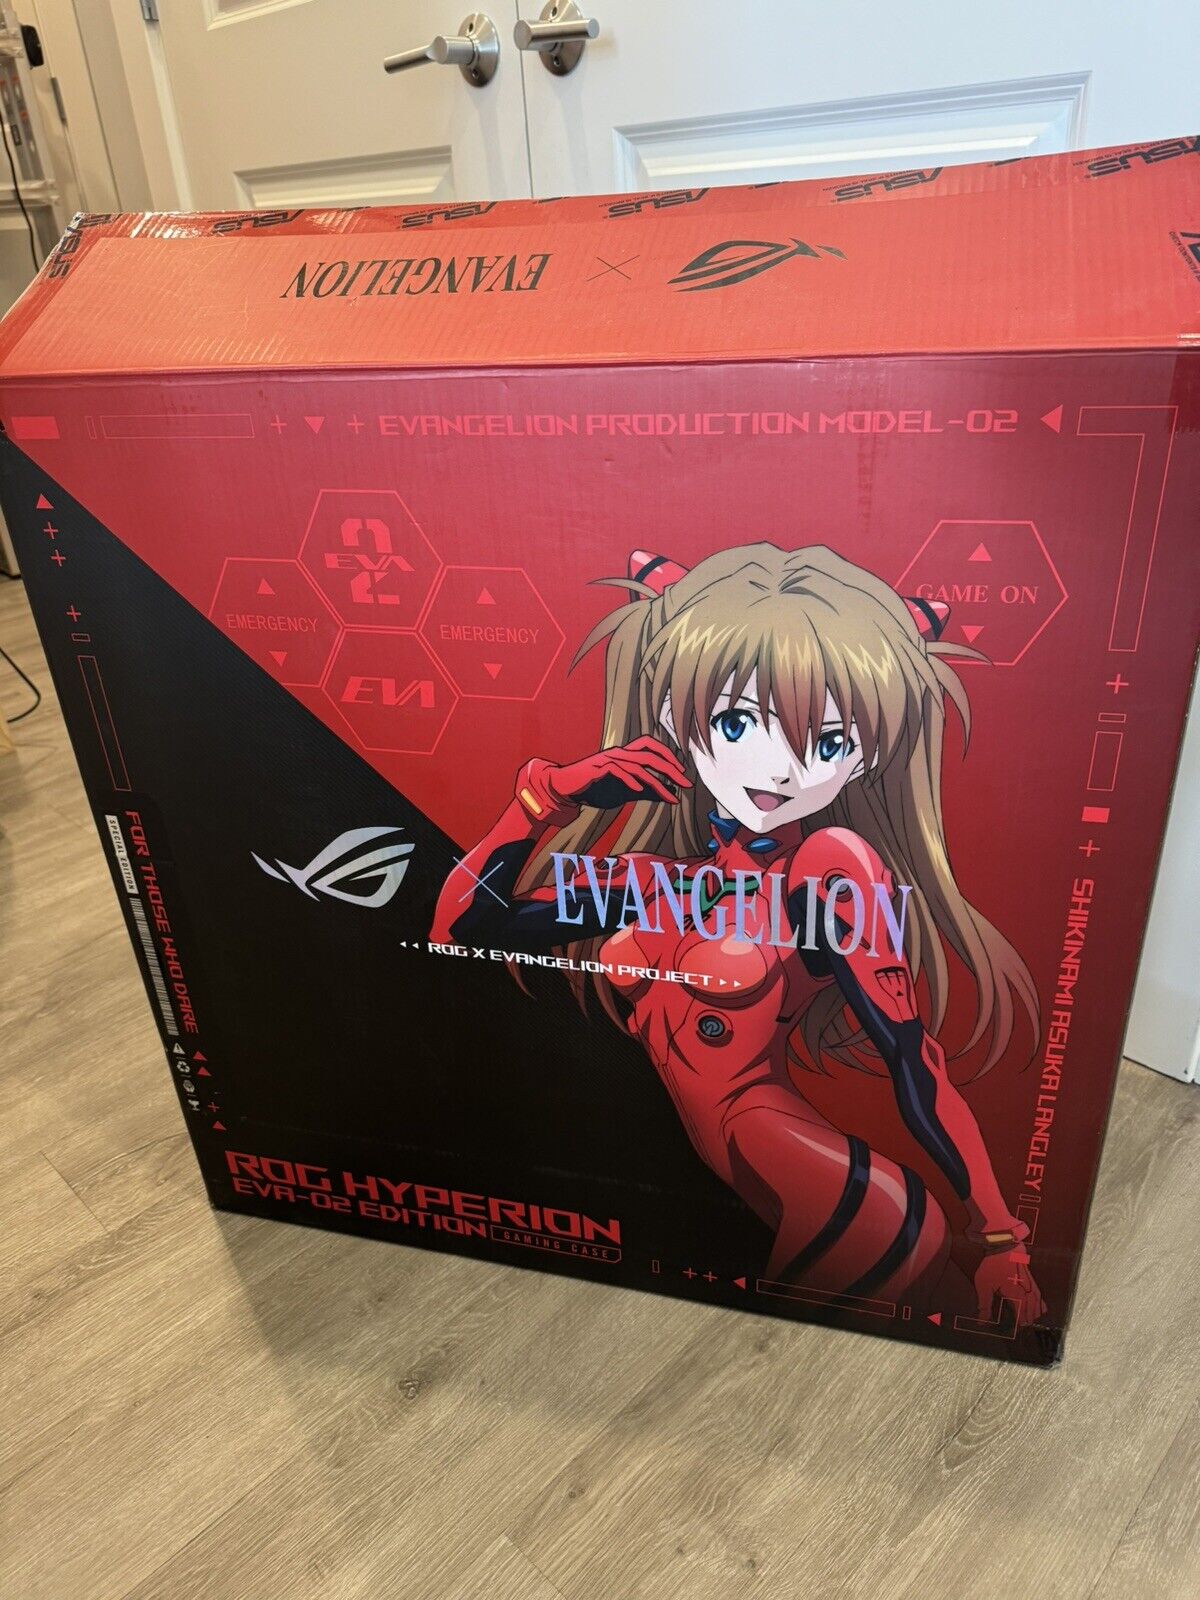 Used/MINT ROG Hyperion EVA-02 Edition Evangelion PC Gaming Case